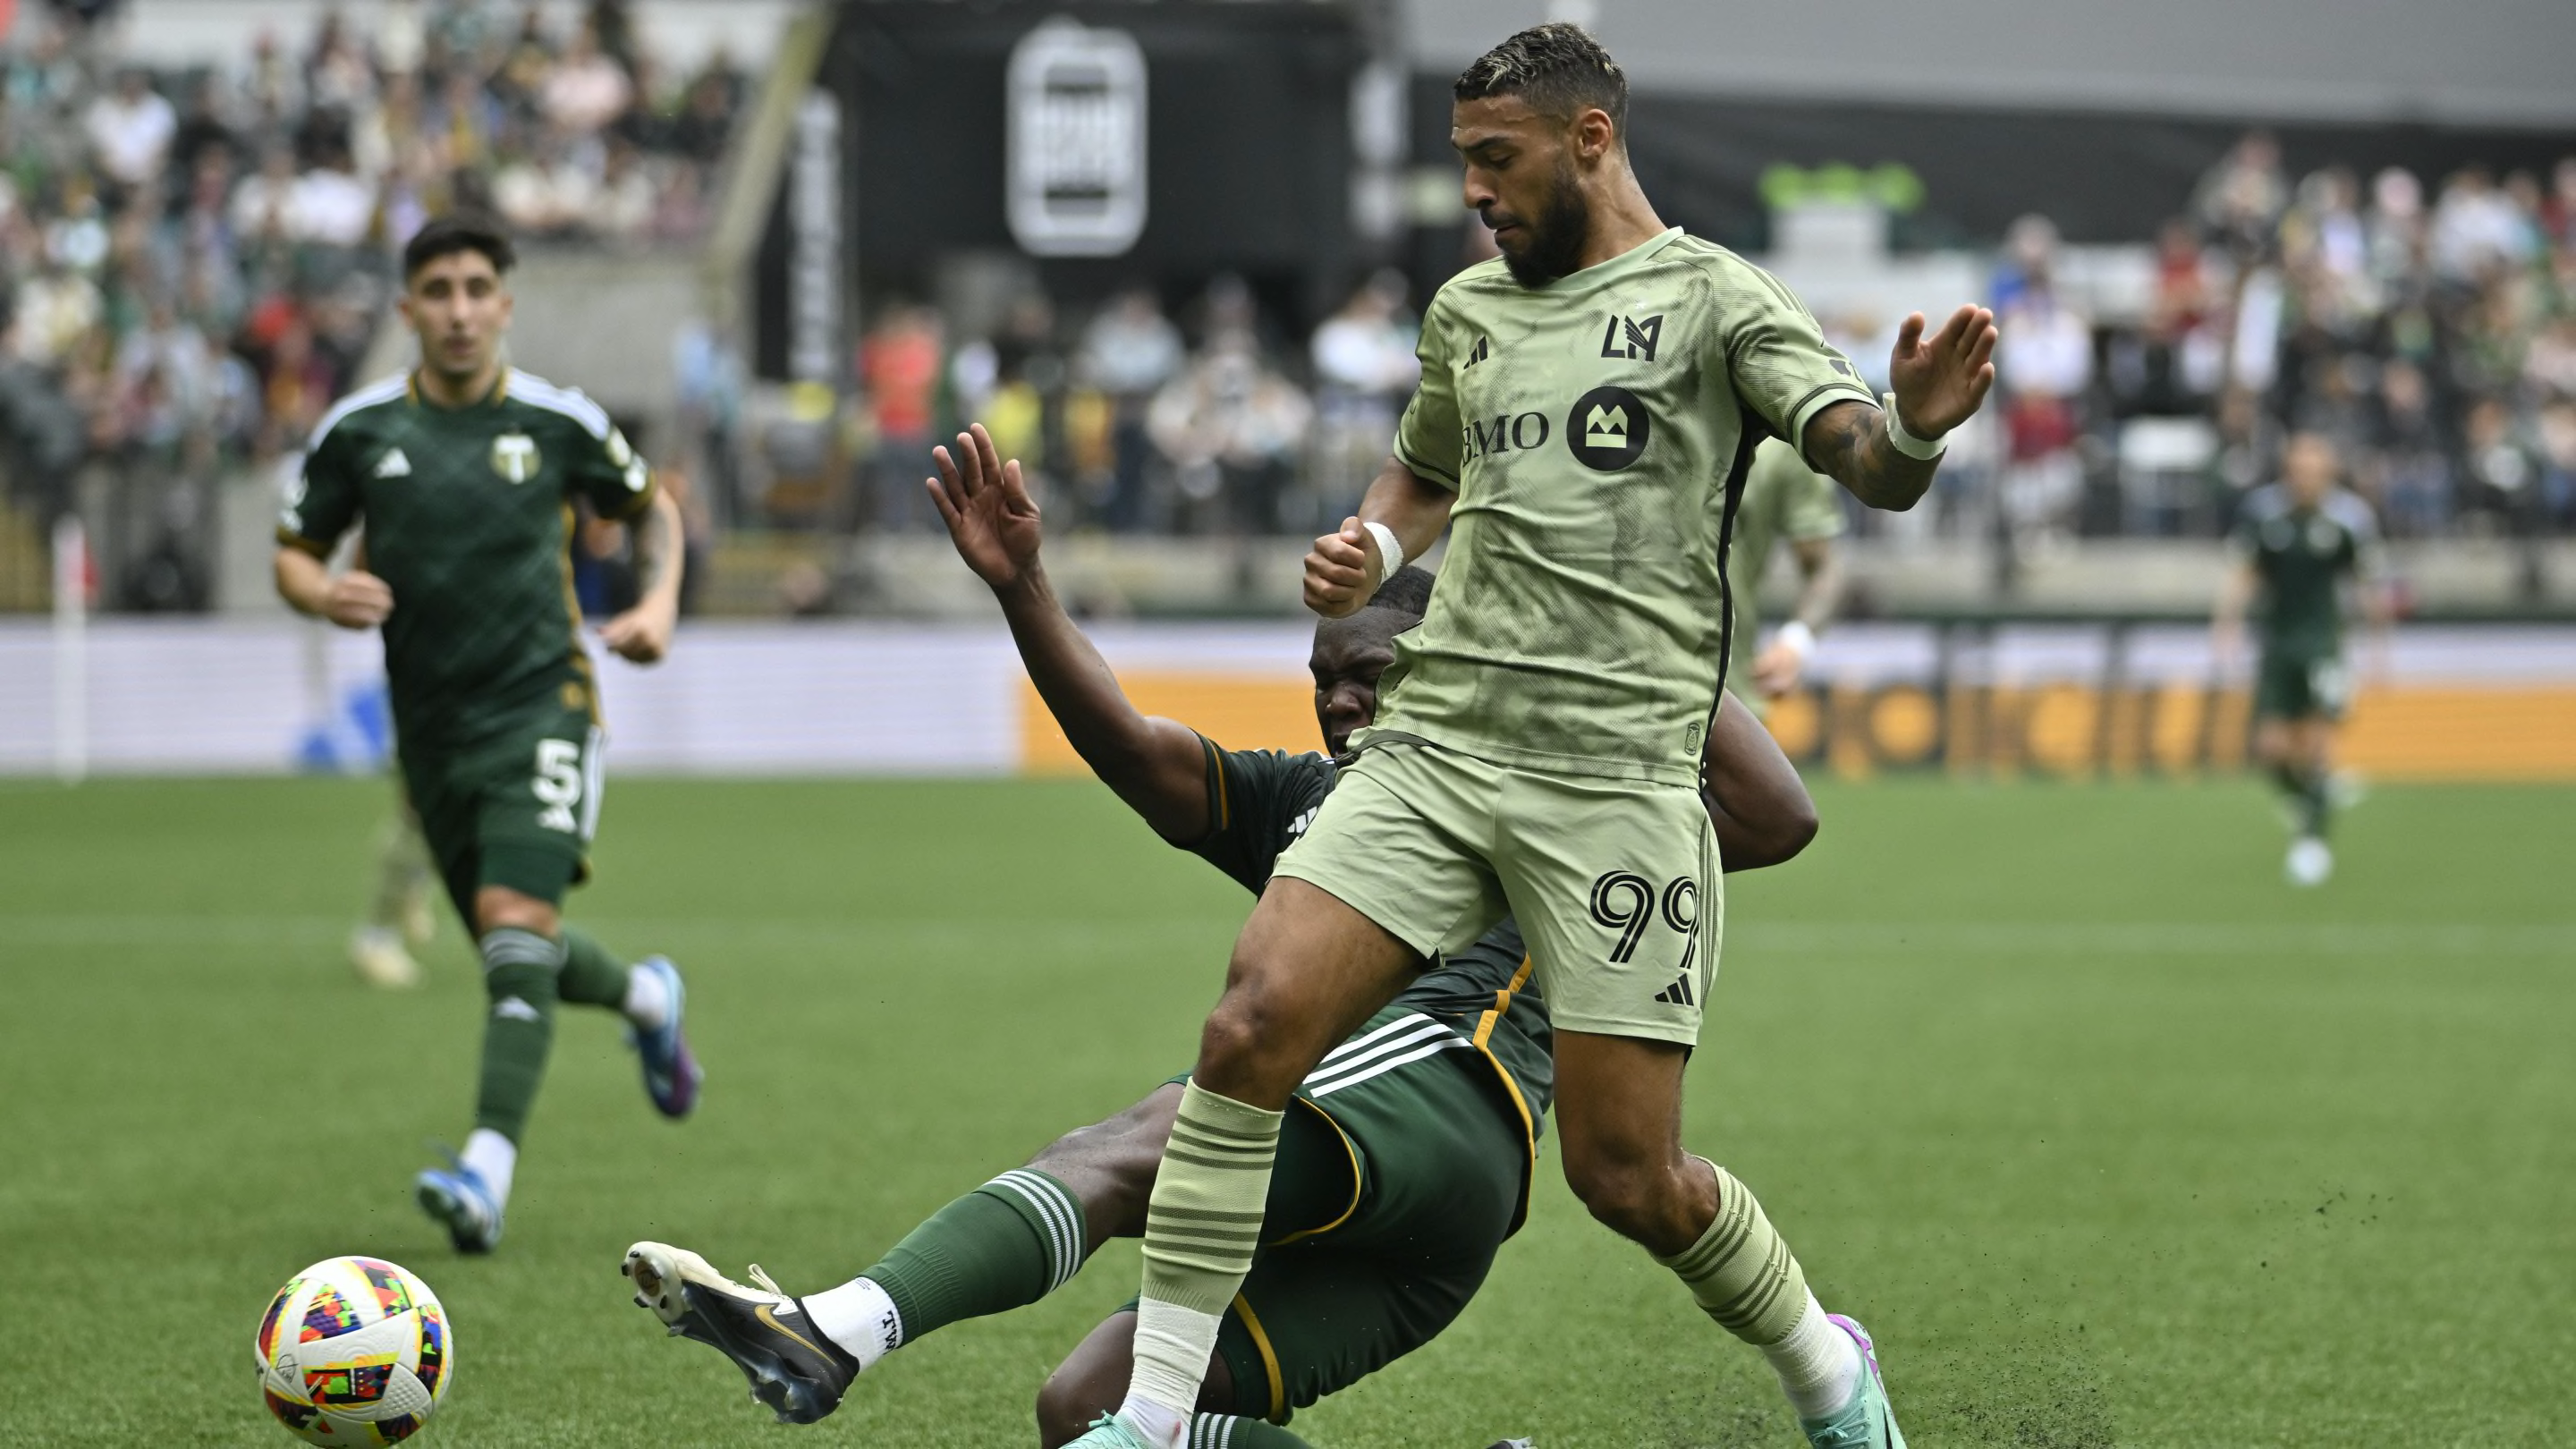 Portland Timbers 2-2 LAFC: Player ratings as Black and Gold held to draw against 10 men